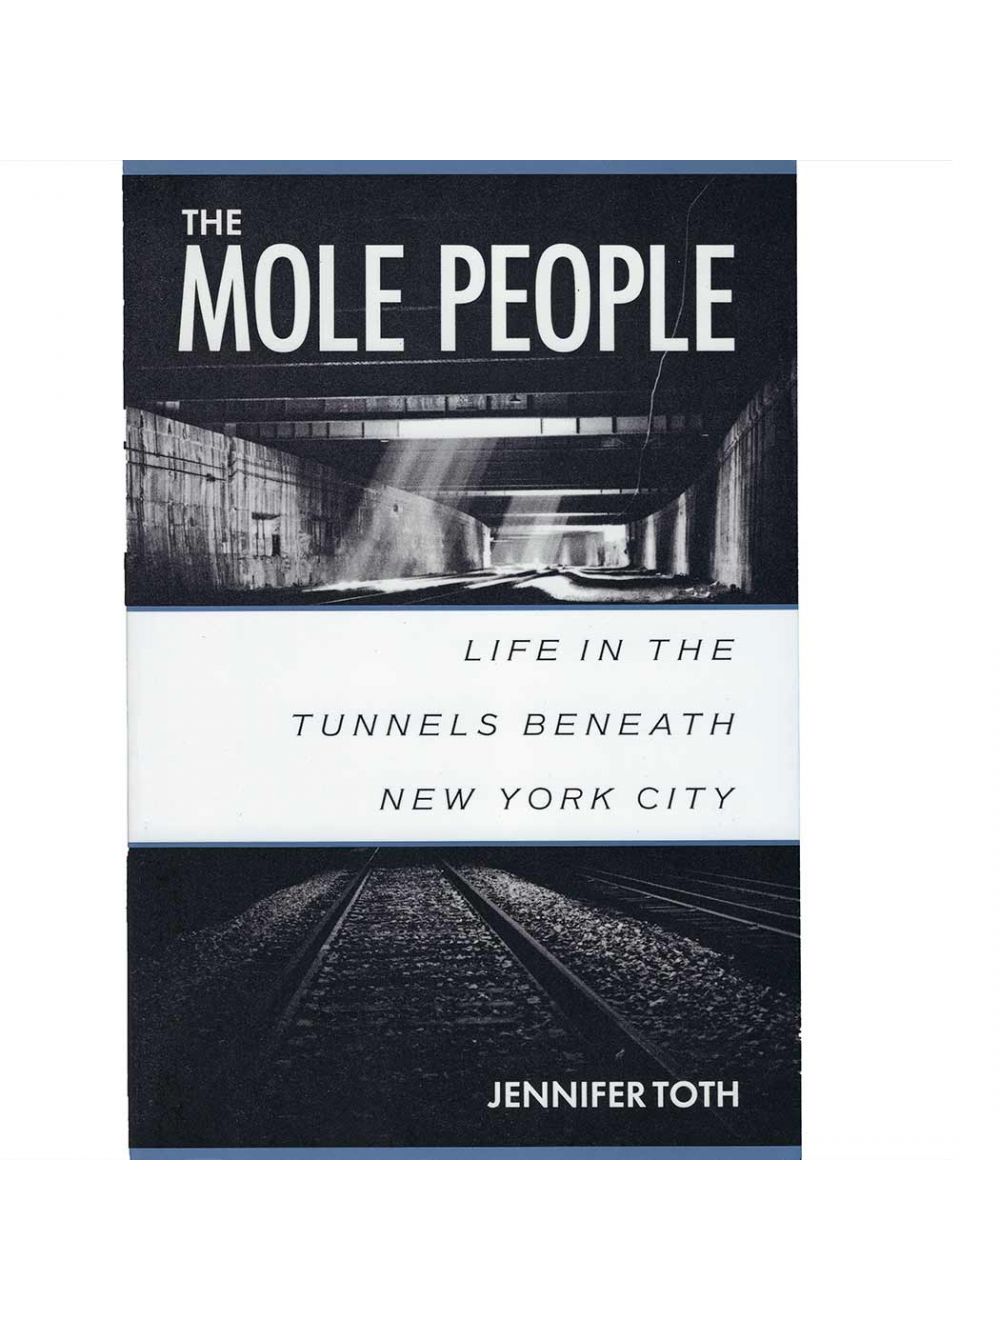 The Mole People Life in the Tunnels Beneath New York City